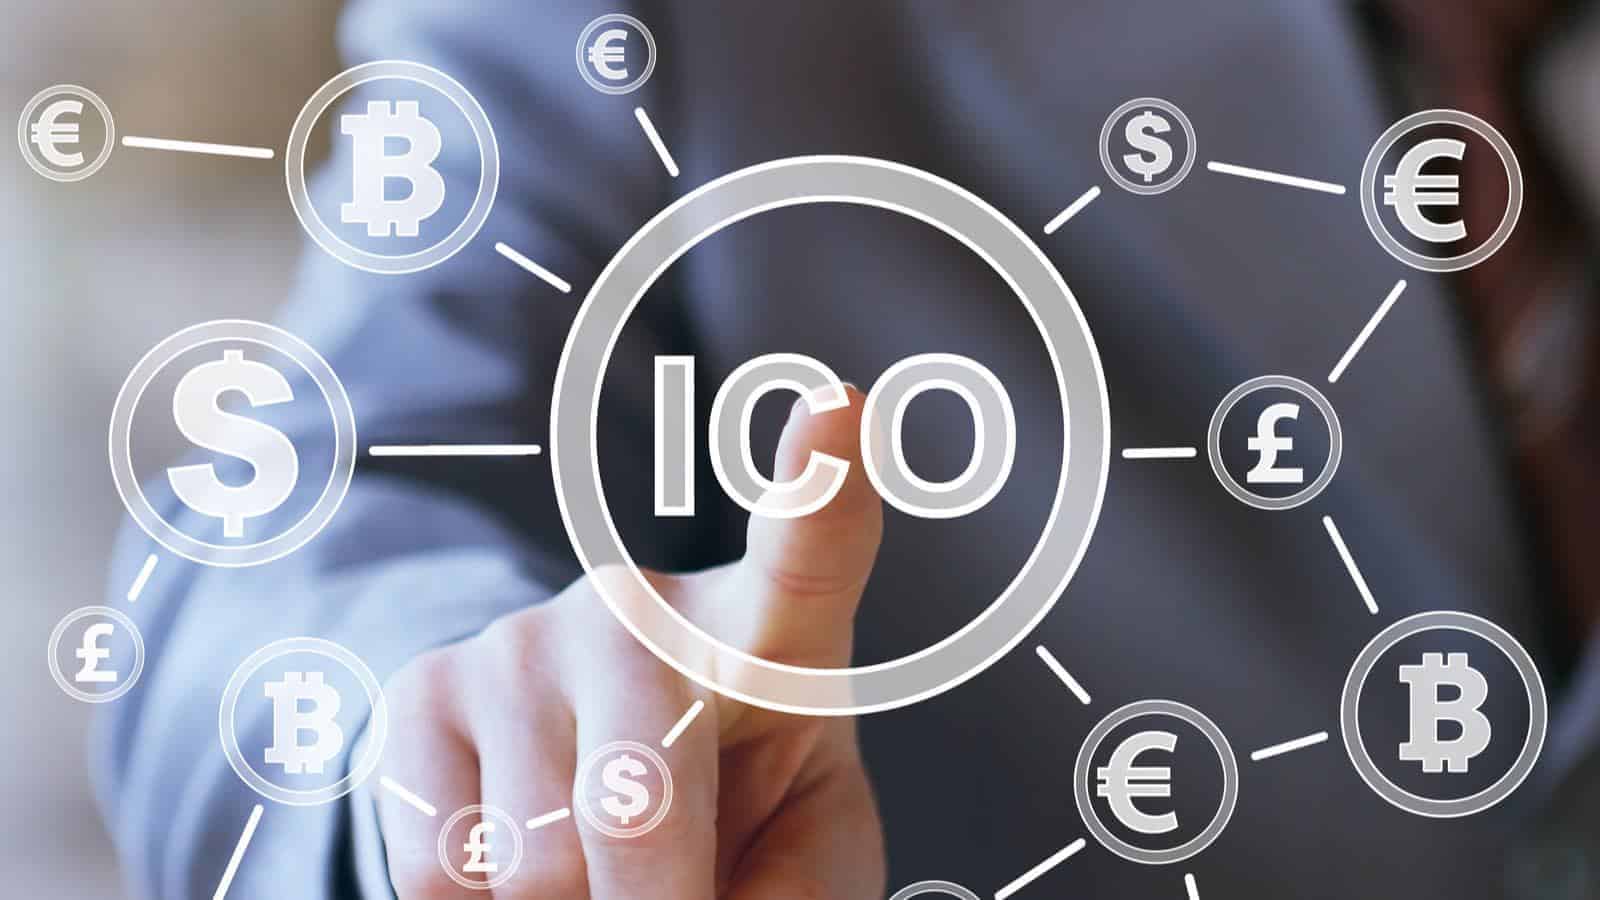 ICO (Initial Coin Offering): What Is It And How Does It Work?